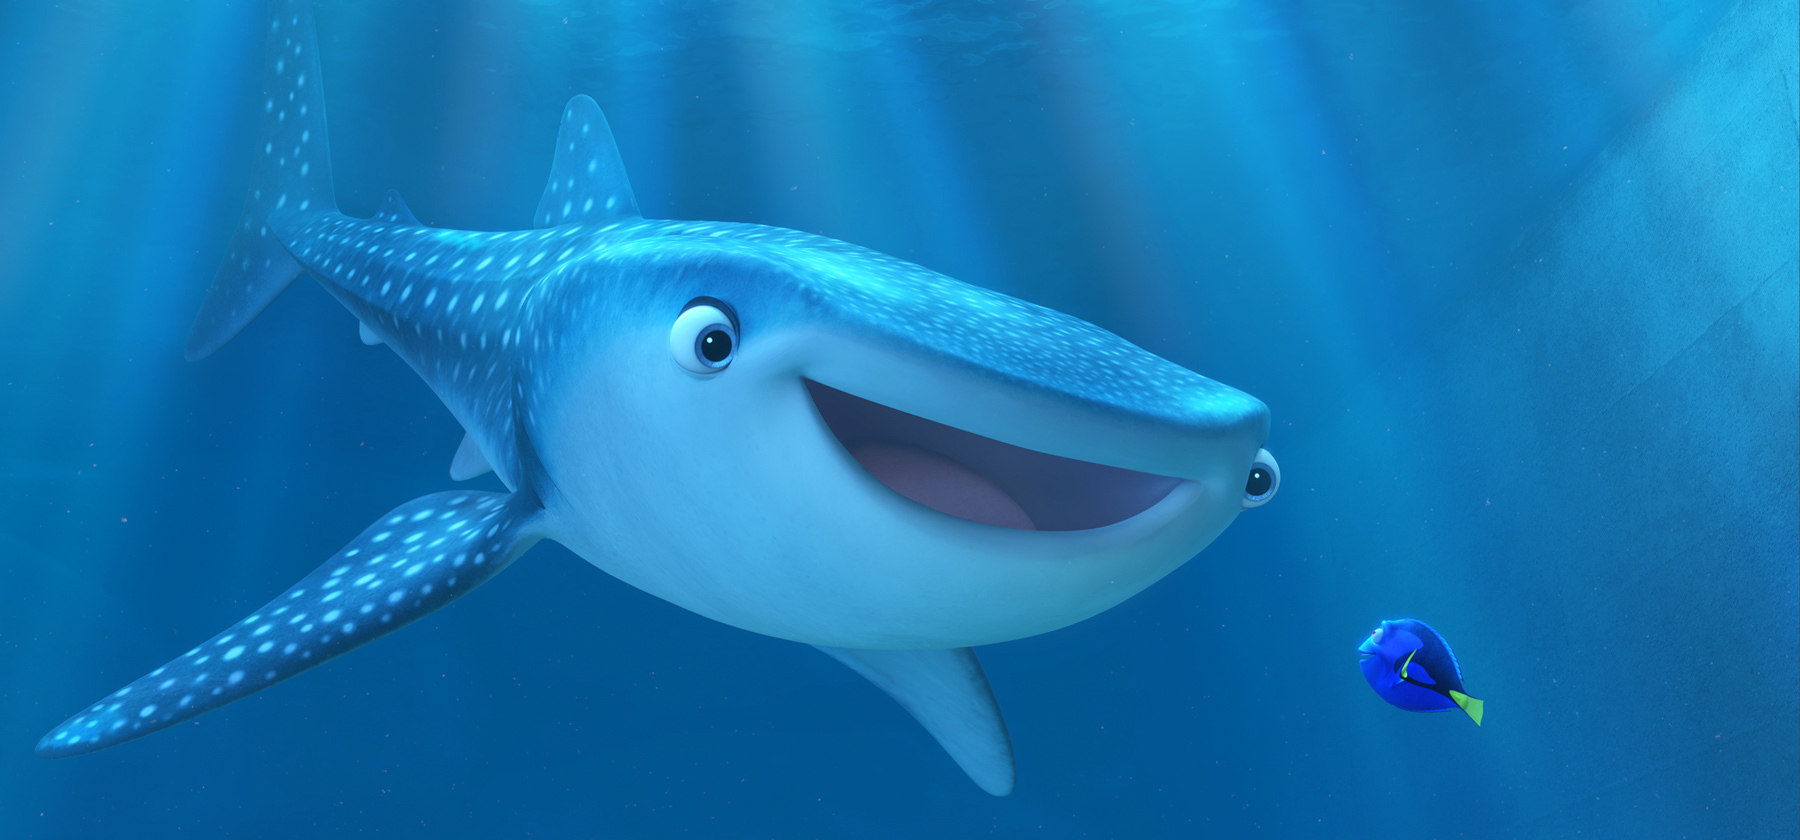 gallery_findingdory_13_1724a87d.jpeg